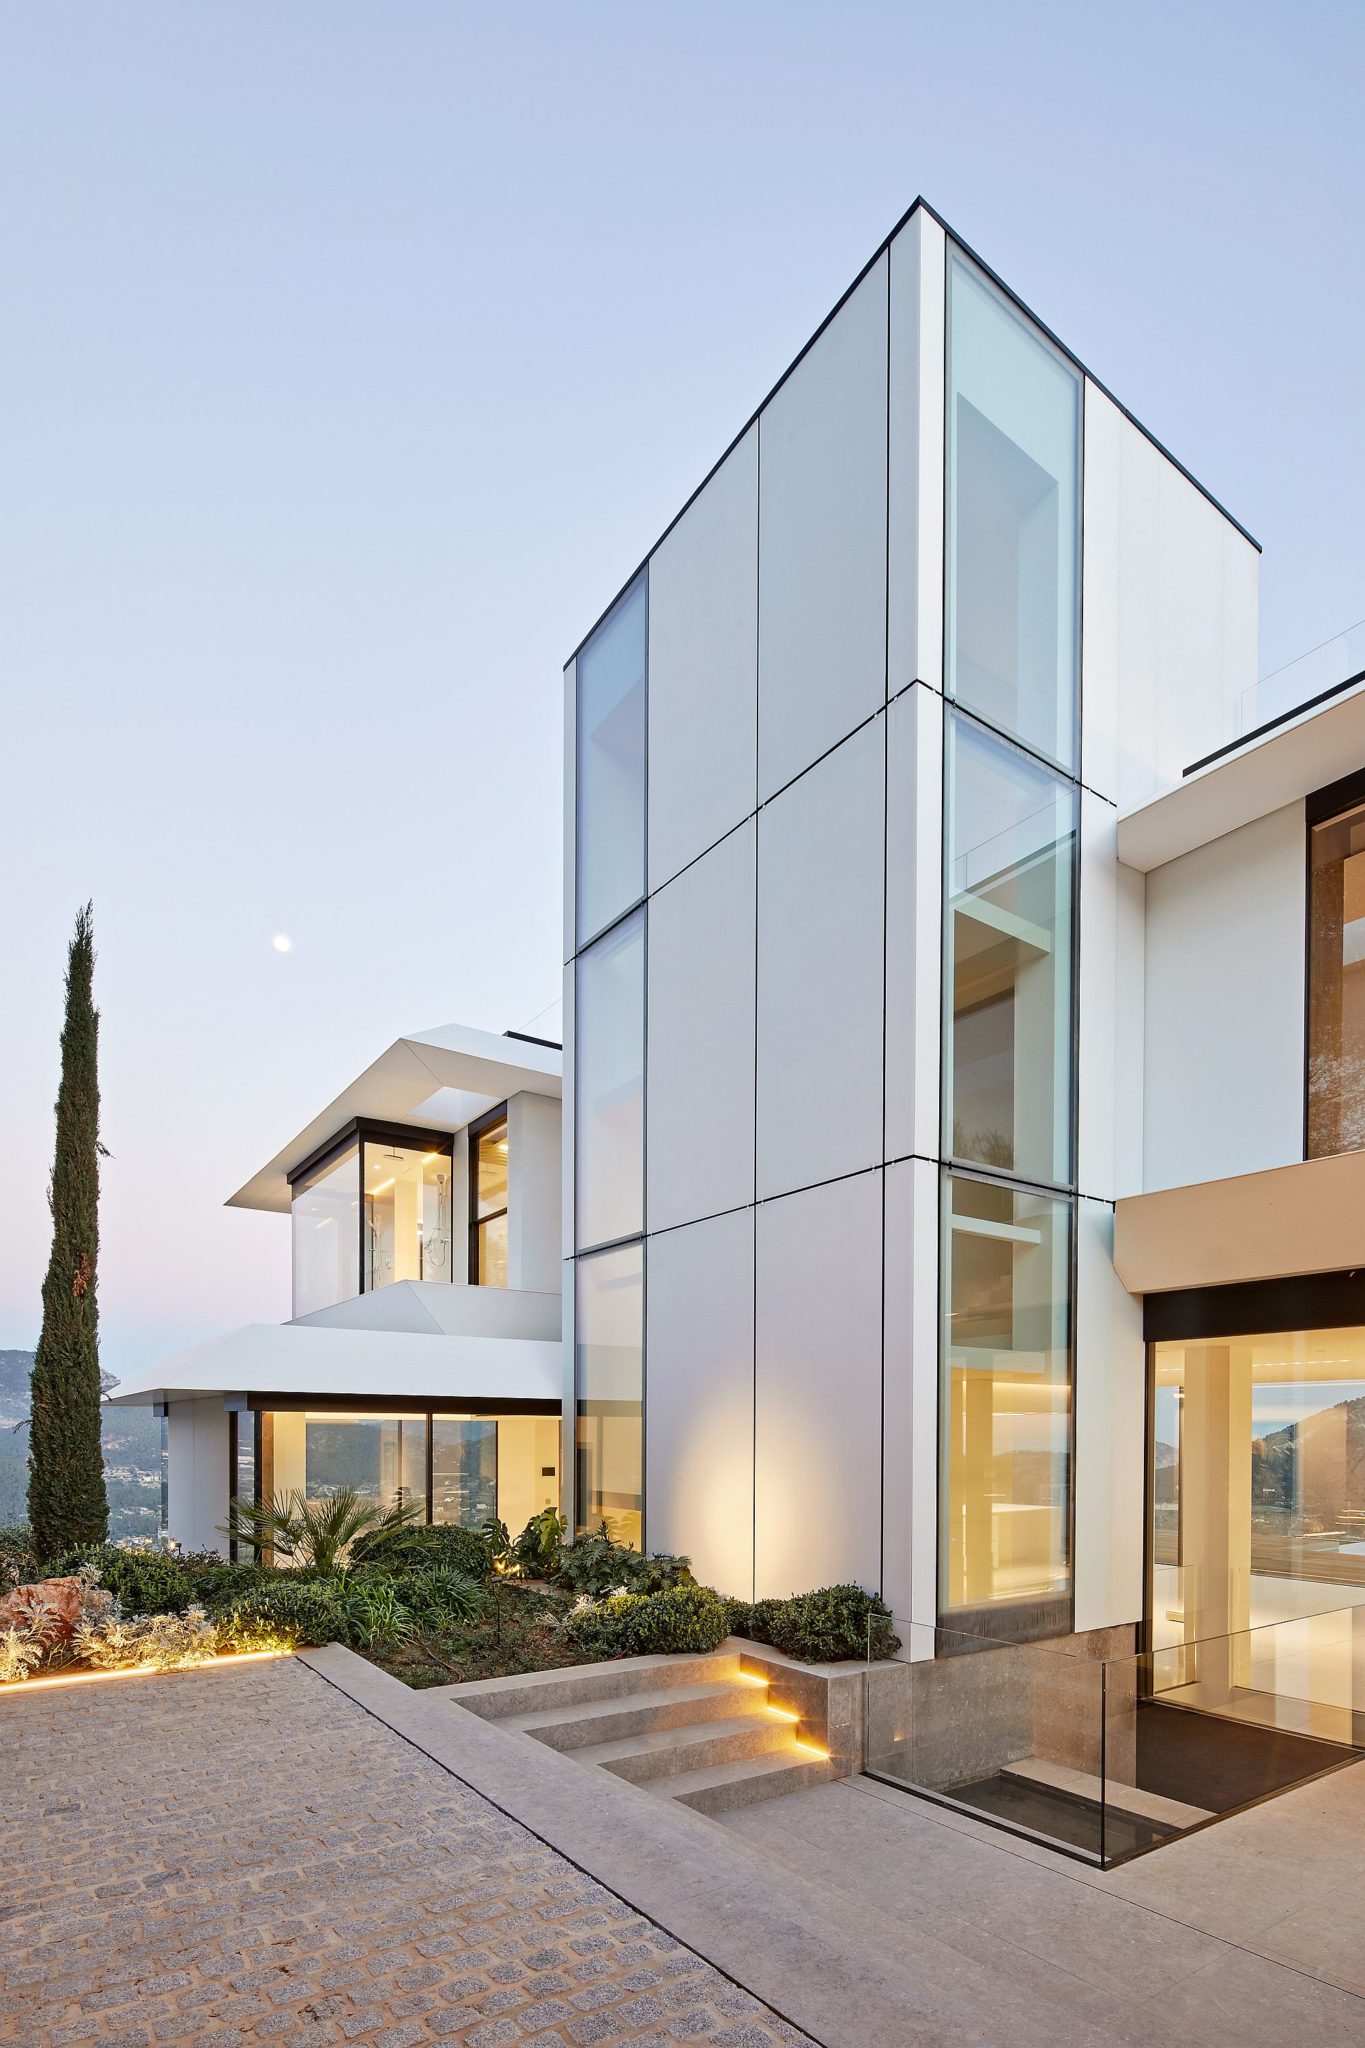 Cutting-edge ceramic tiles combined with glass and wood to create a fabulous modern home